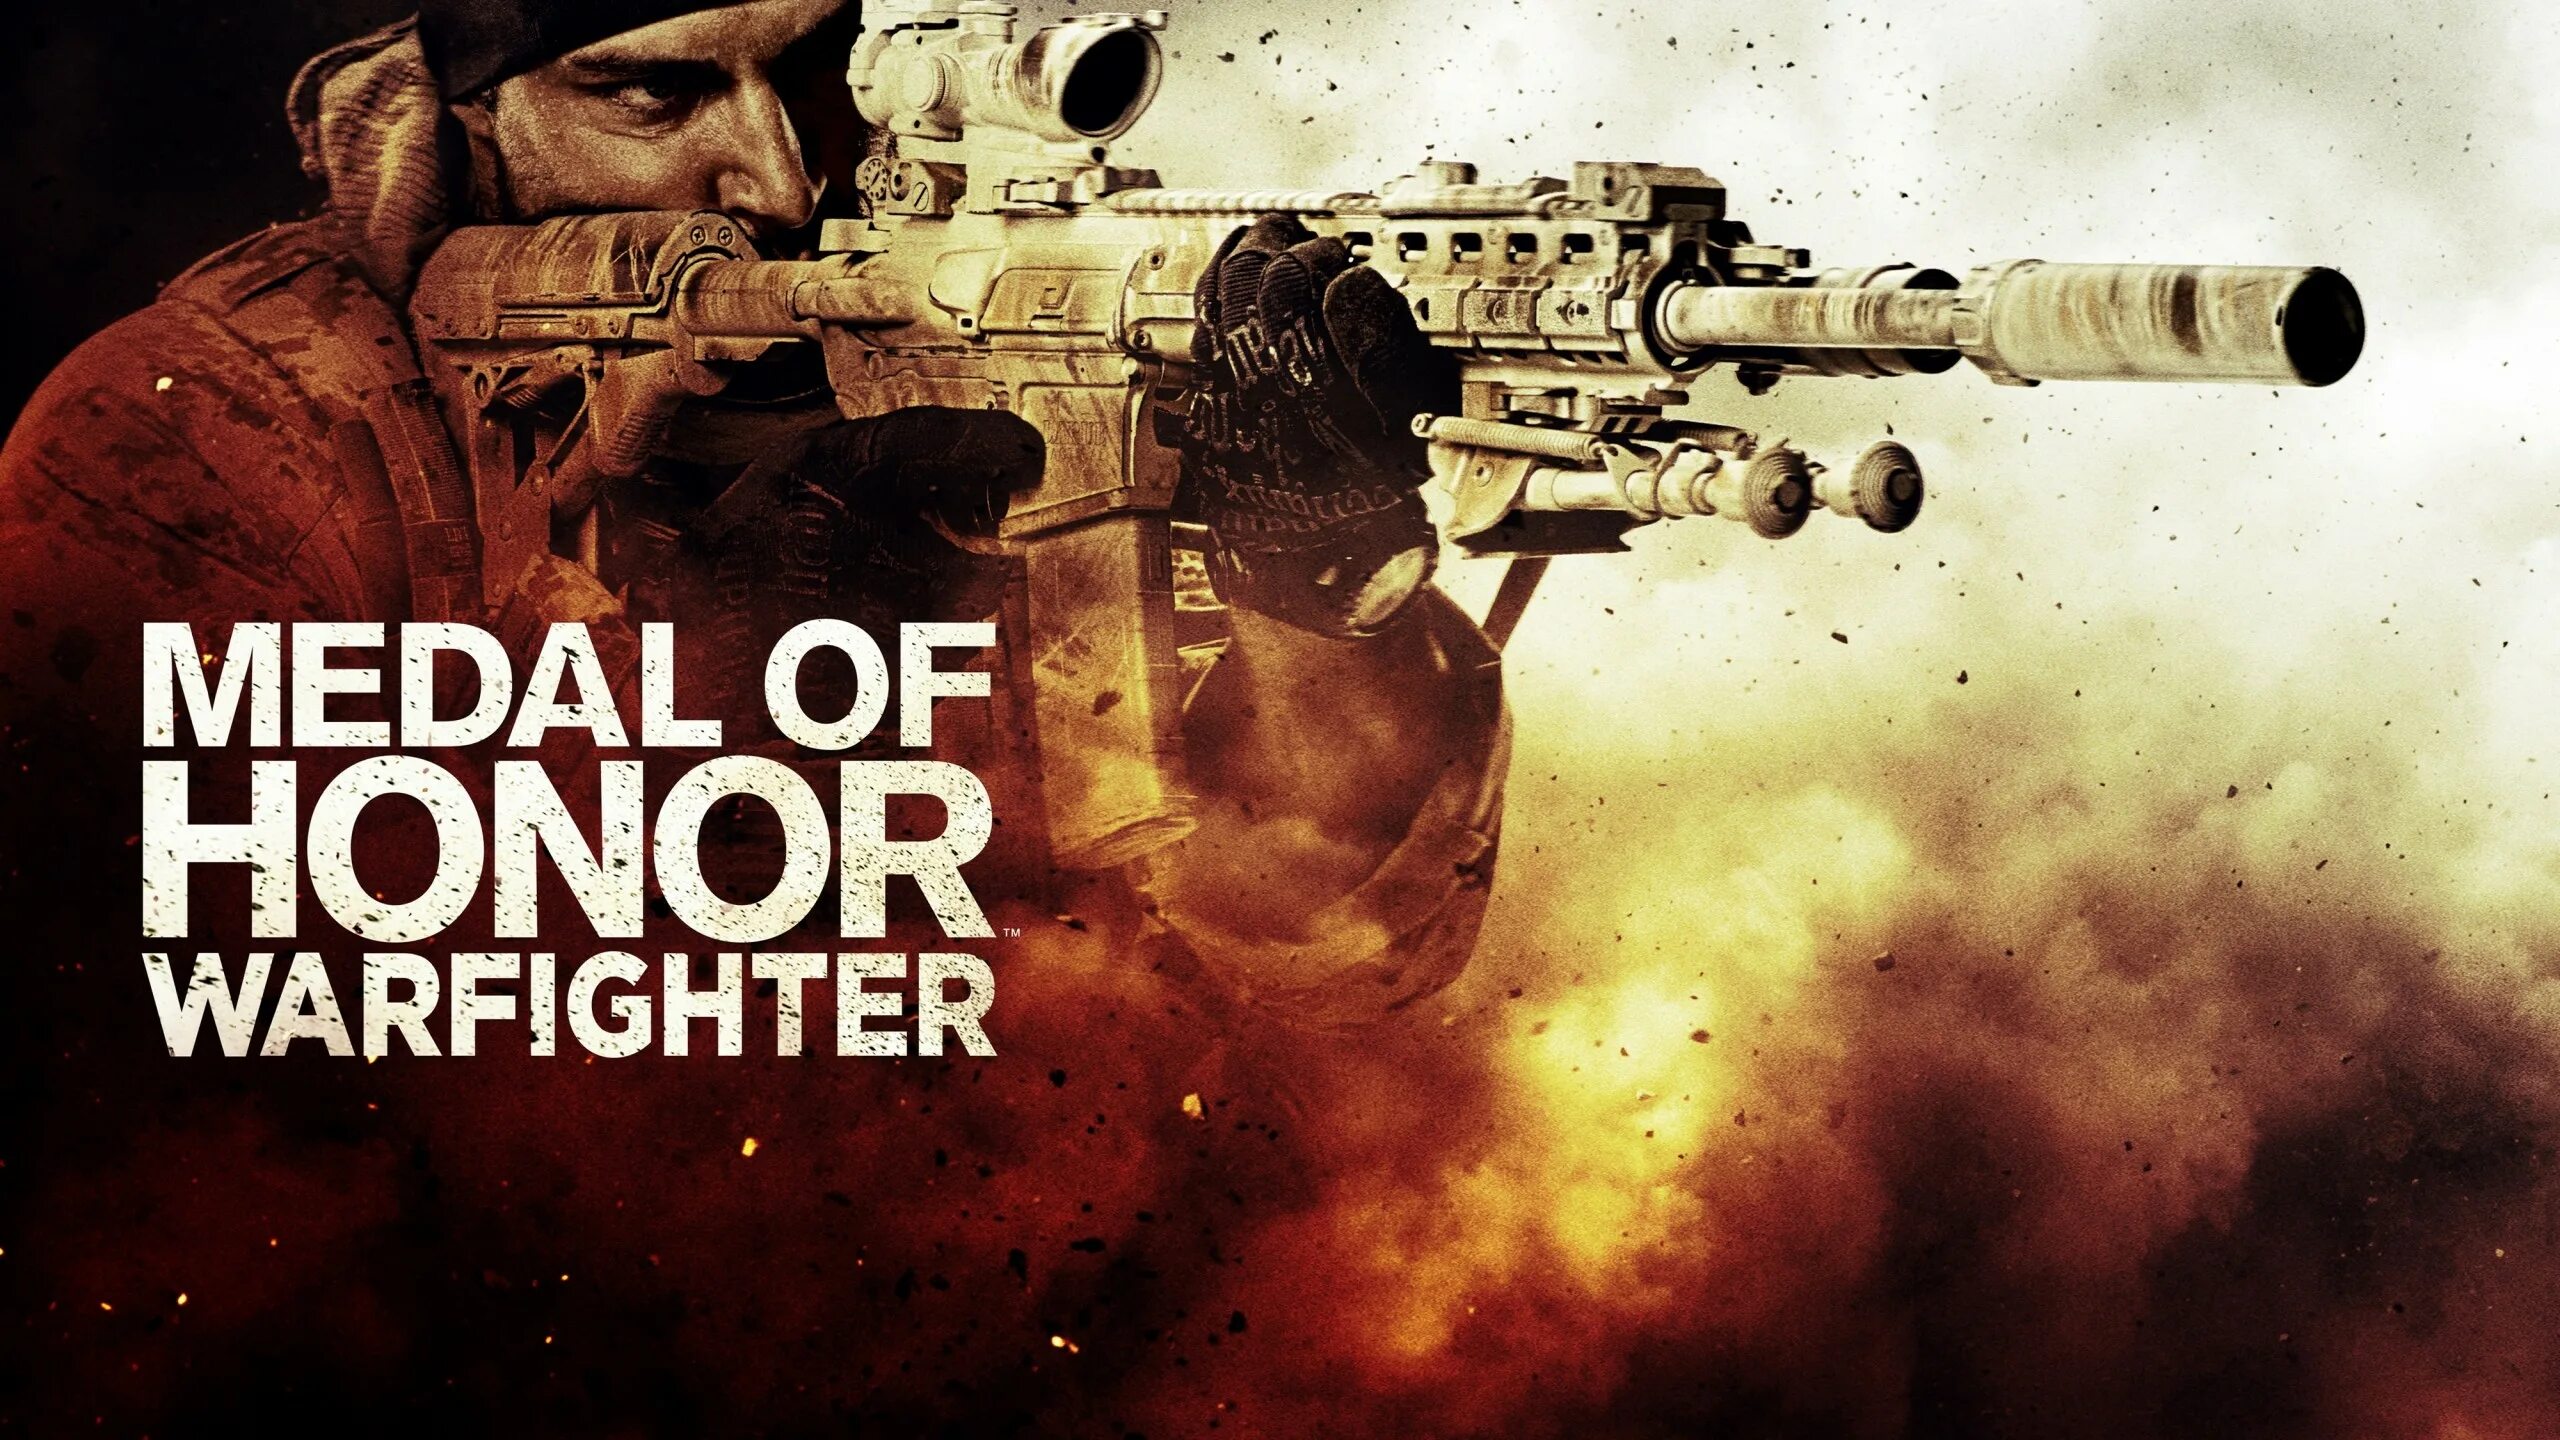 Medal of honor 10. Medal of Honor Warfighter оружие. Игра Medal of Honor Warfighter. Medal of Honor Warfighter солдат. Medal of Honor плакат.